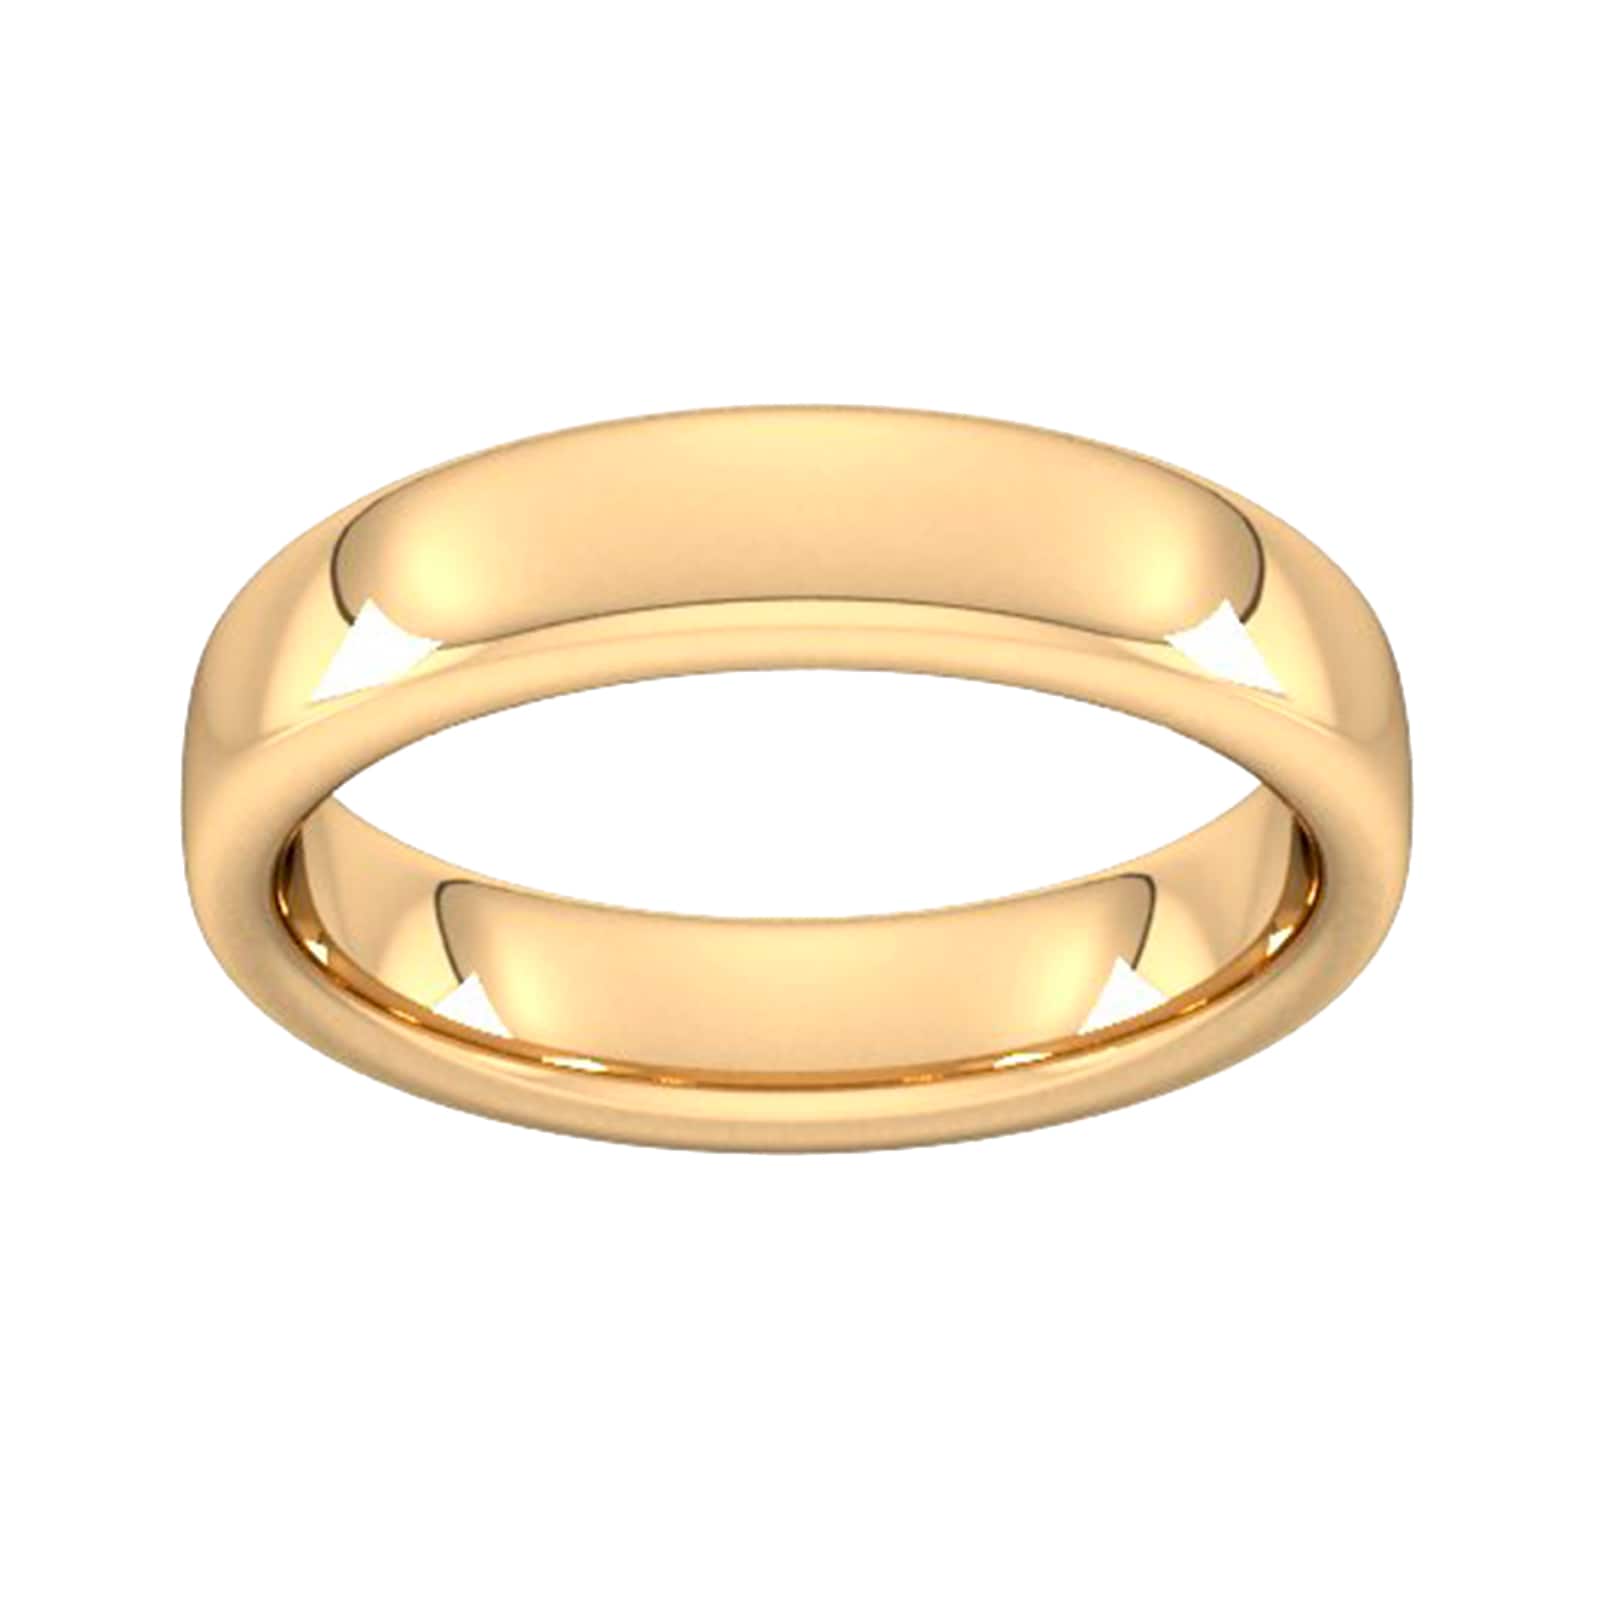 5mm Slight Court Extra Heavy Wedding Ring In 9 Carat Yellow Gold - Ring Size Q